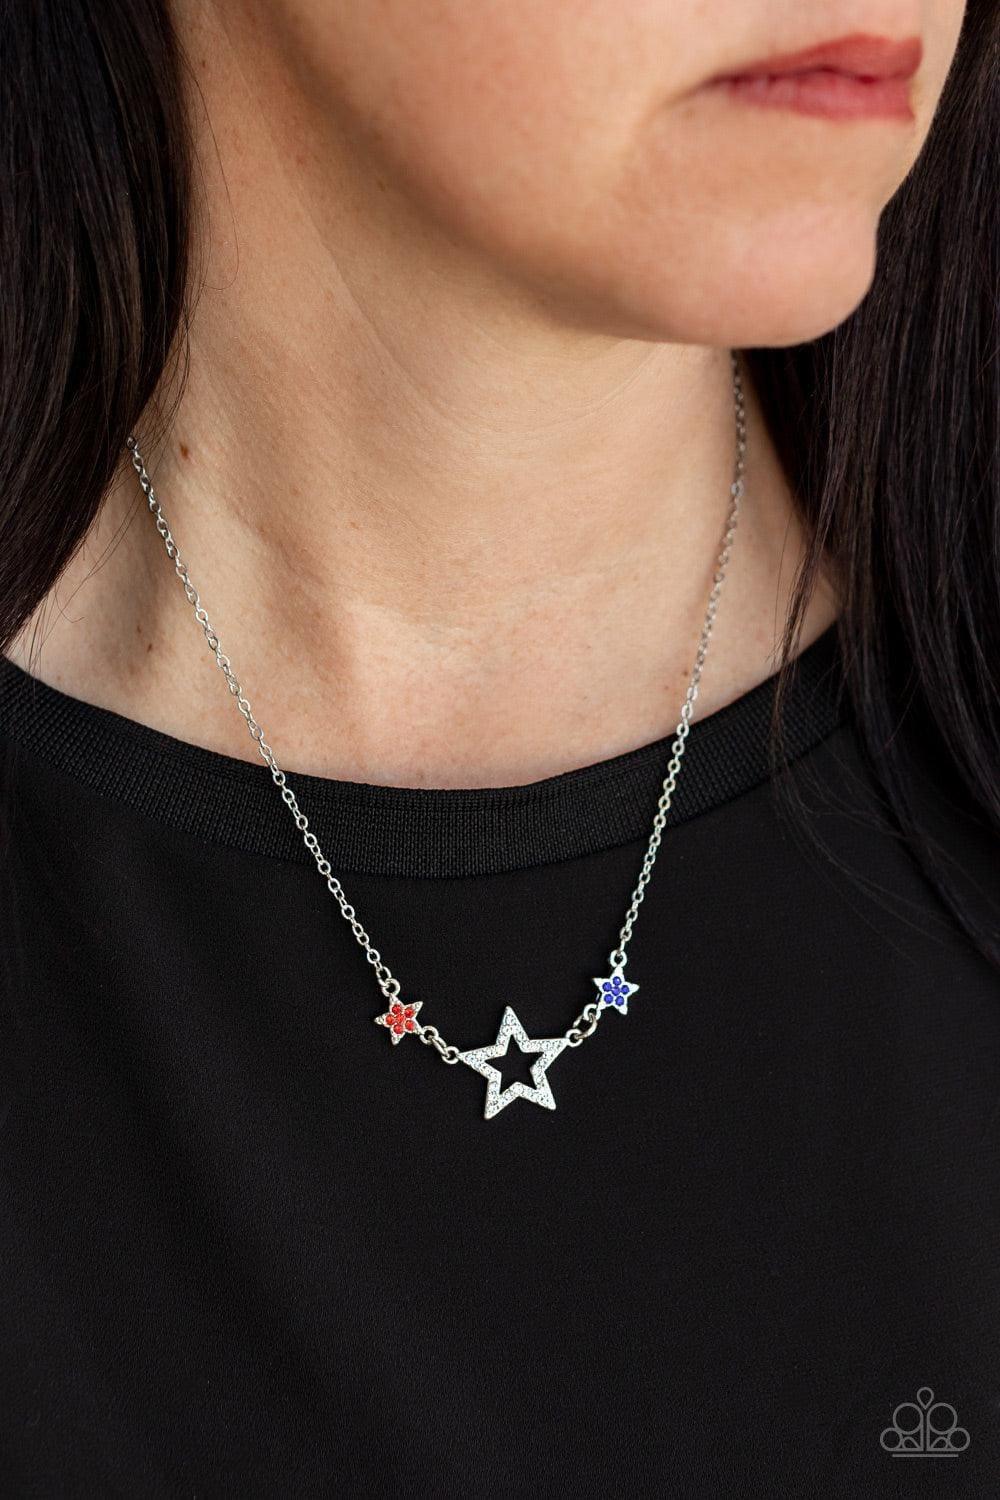 Paparazzi Accessories - United We Sparkle - Multicolor Necklace - Bling by JessieK